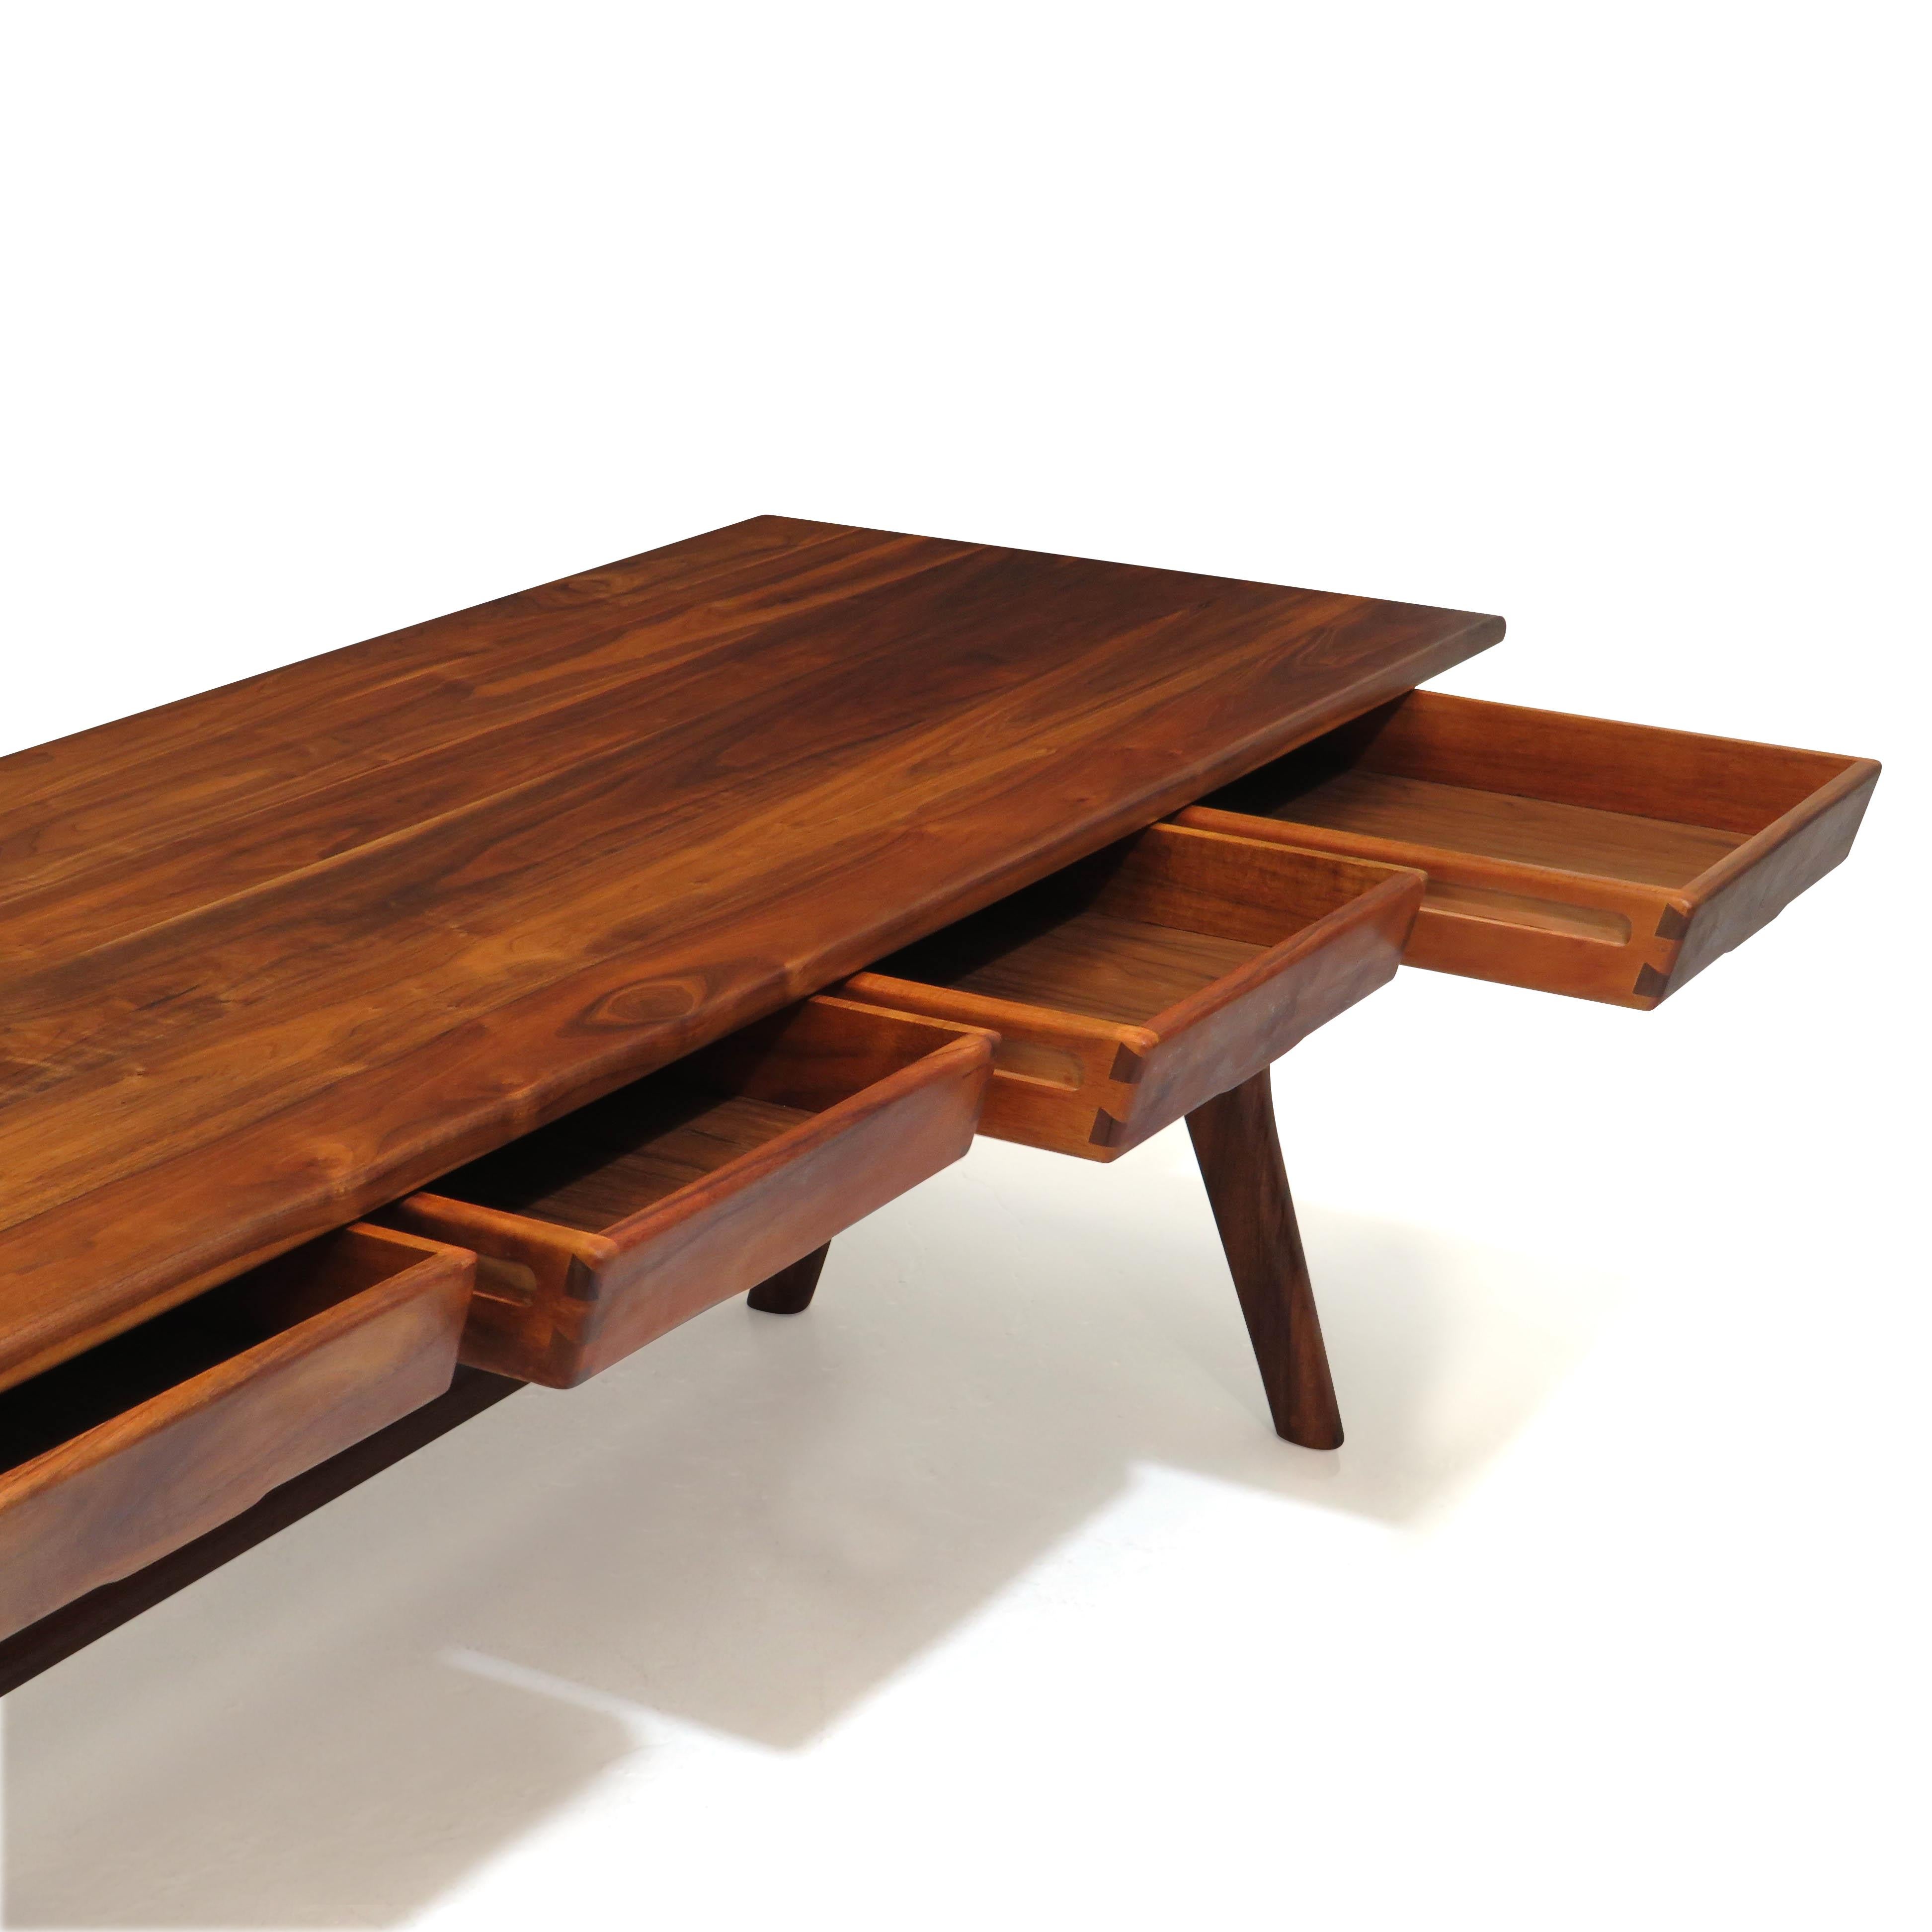 California studio desk by Berkeley craftsman Jim Sweeney. The desk is crafted of a solid Walnut and Koa, features four drawers with exposed joinery on sides, raised on the angled trestle legs with cross stretcher.